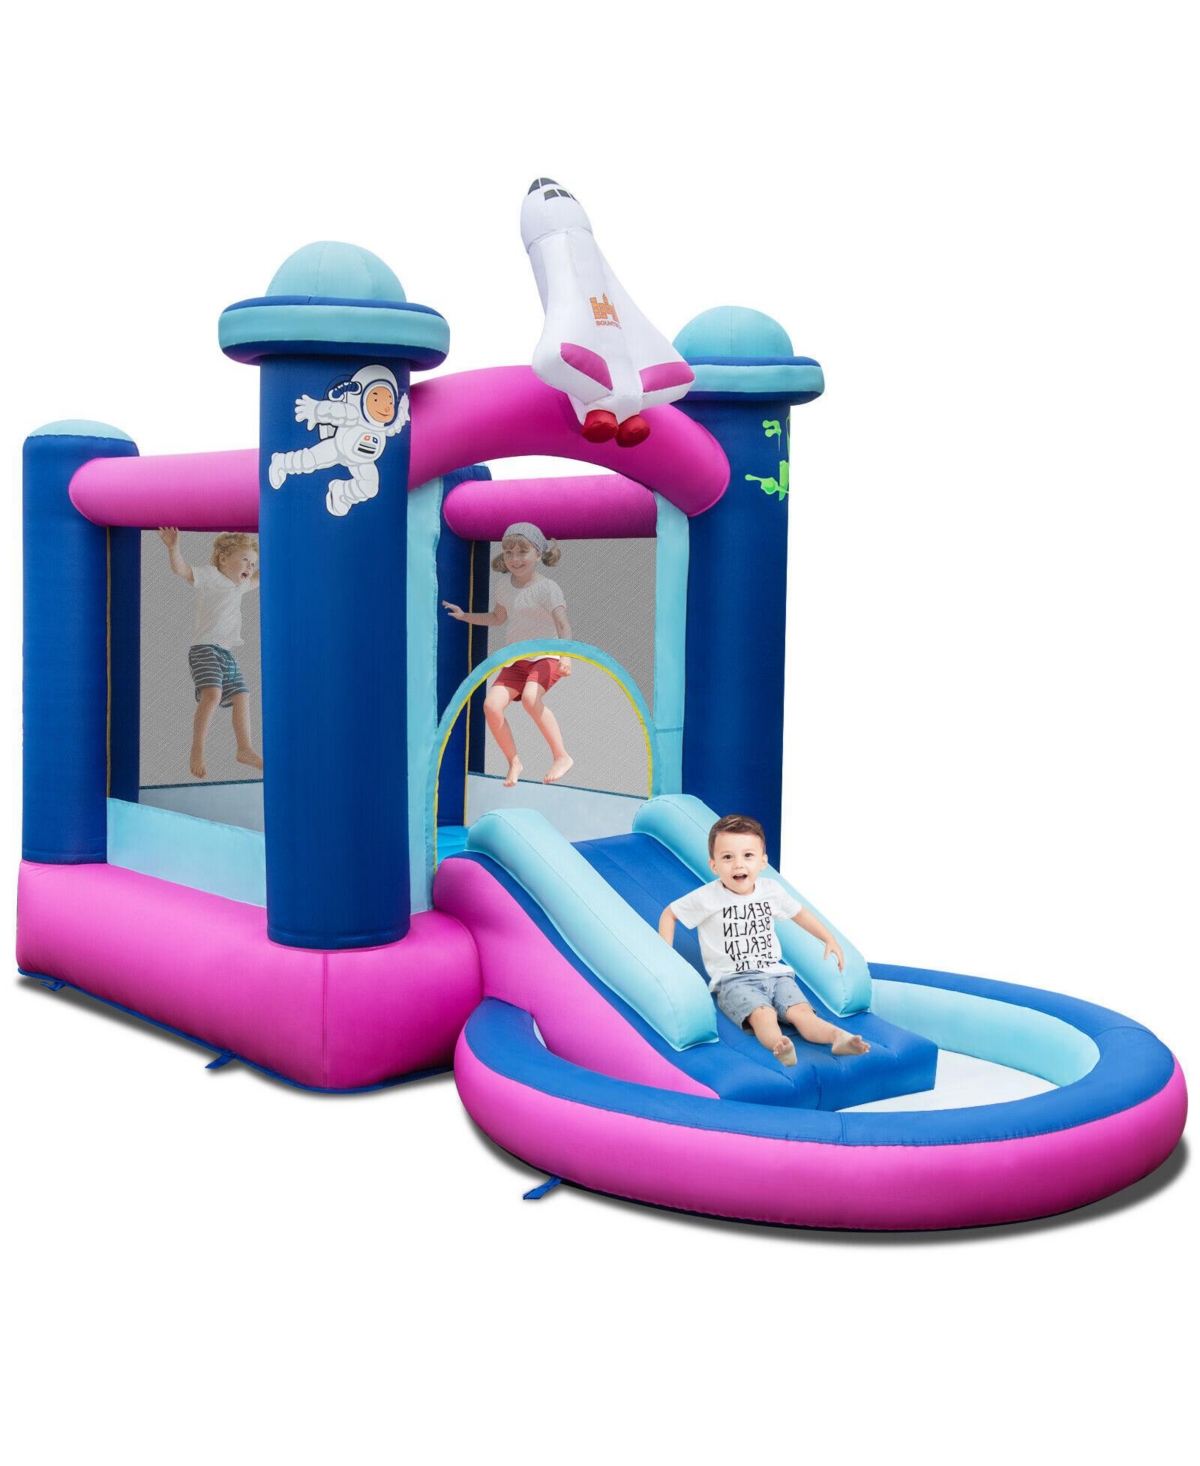 3-in-1 Inflatable Space-themed Bounce House with 480W Blower - Open Miscellaneous